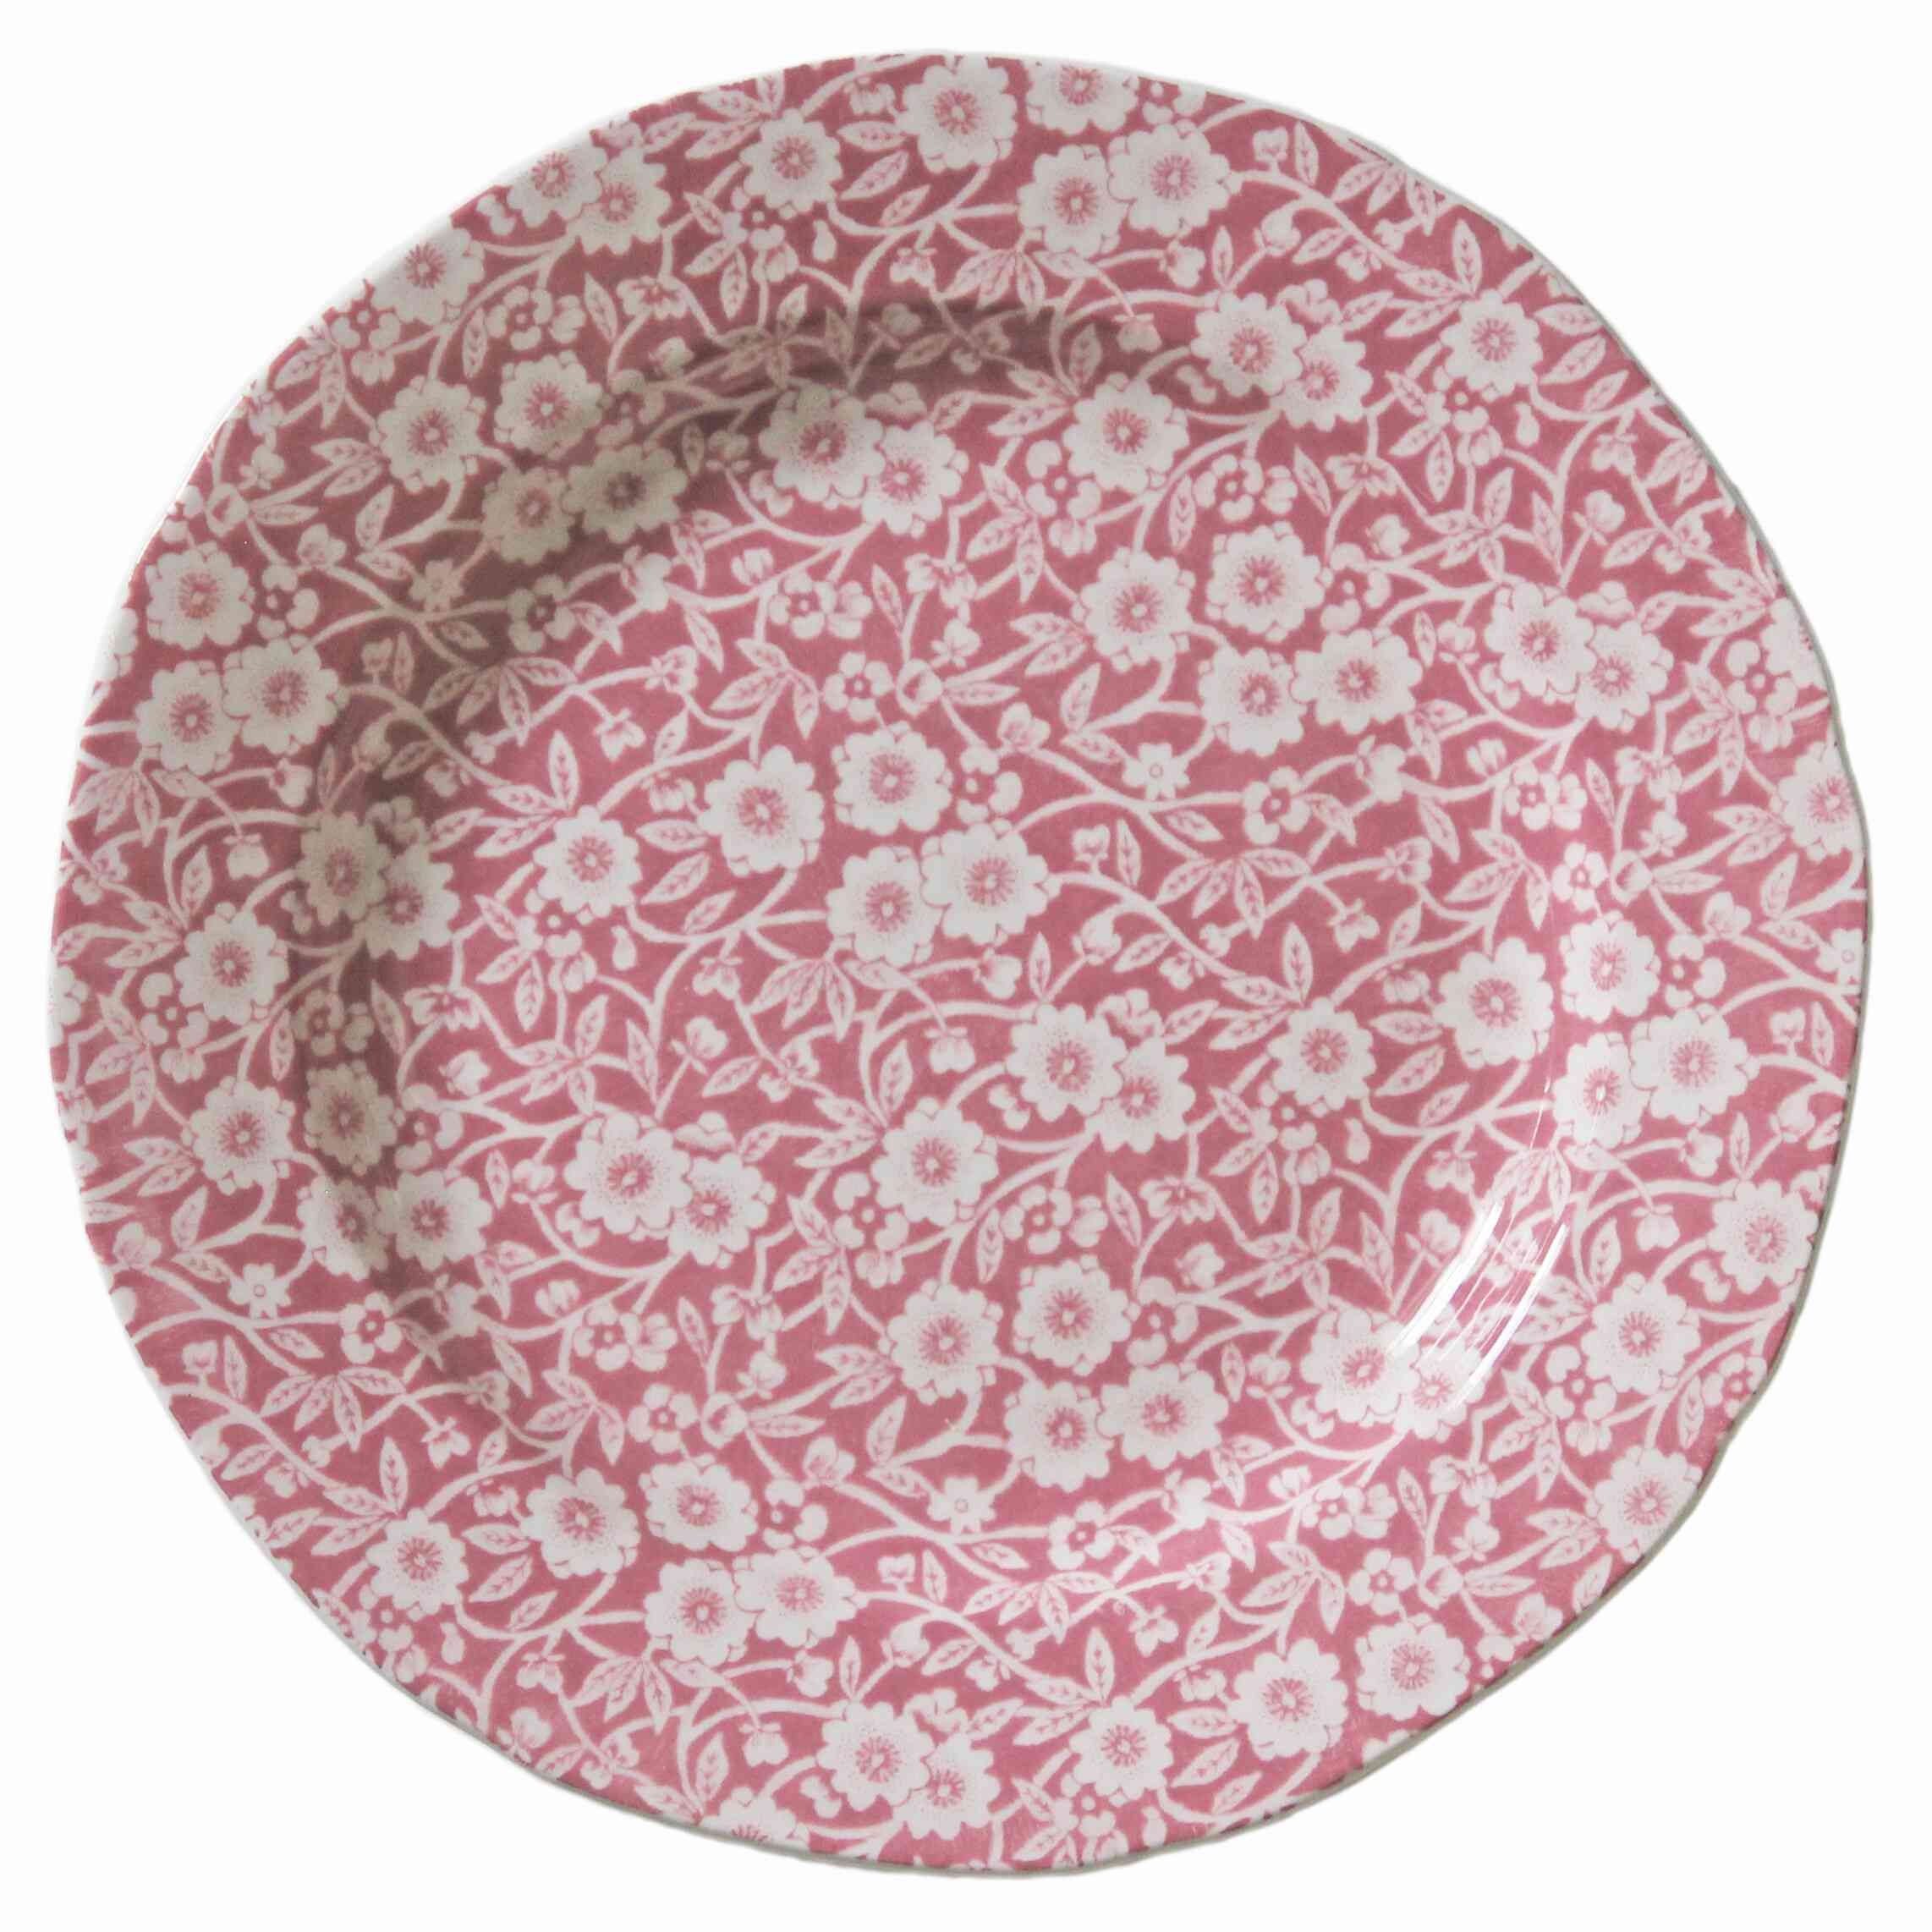 Pink Calico Plate 21.5cm/8.5